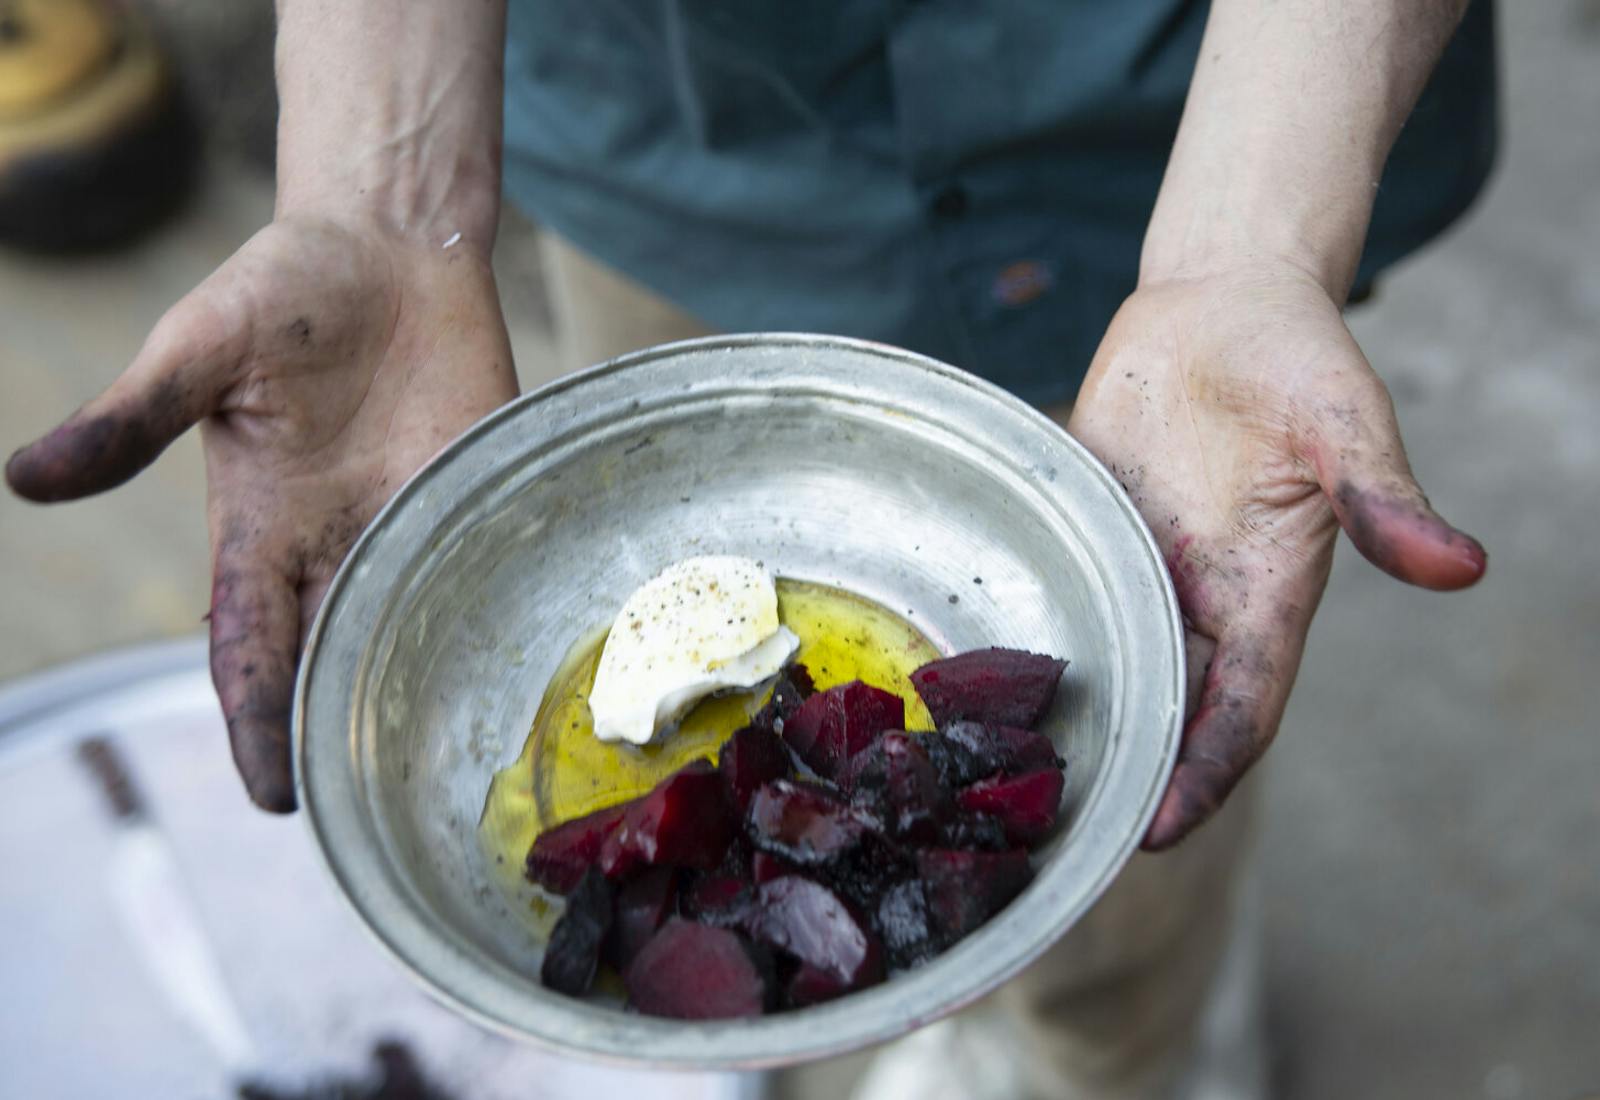 Chef holding metal bowl with charred beets, sour cream and olive oil.